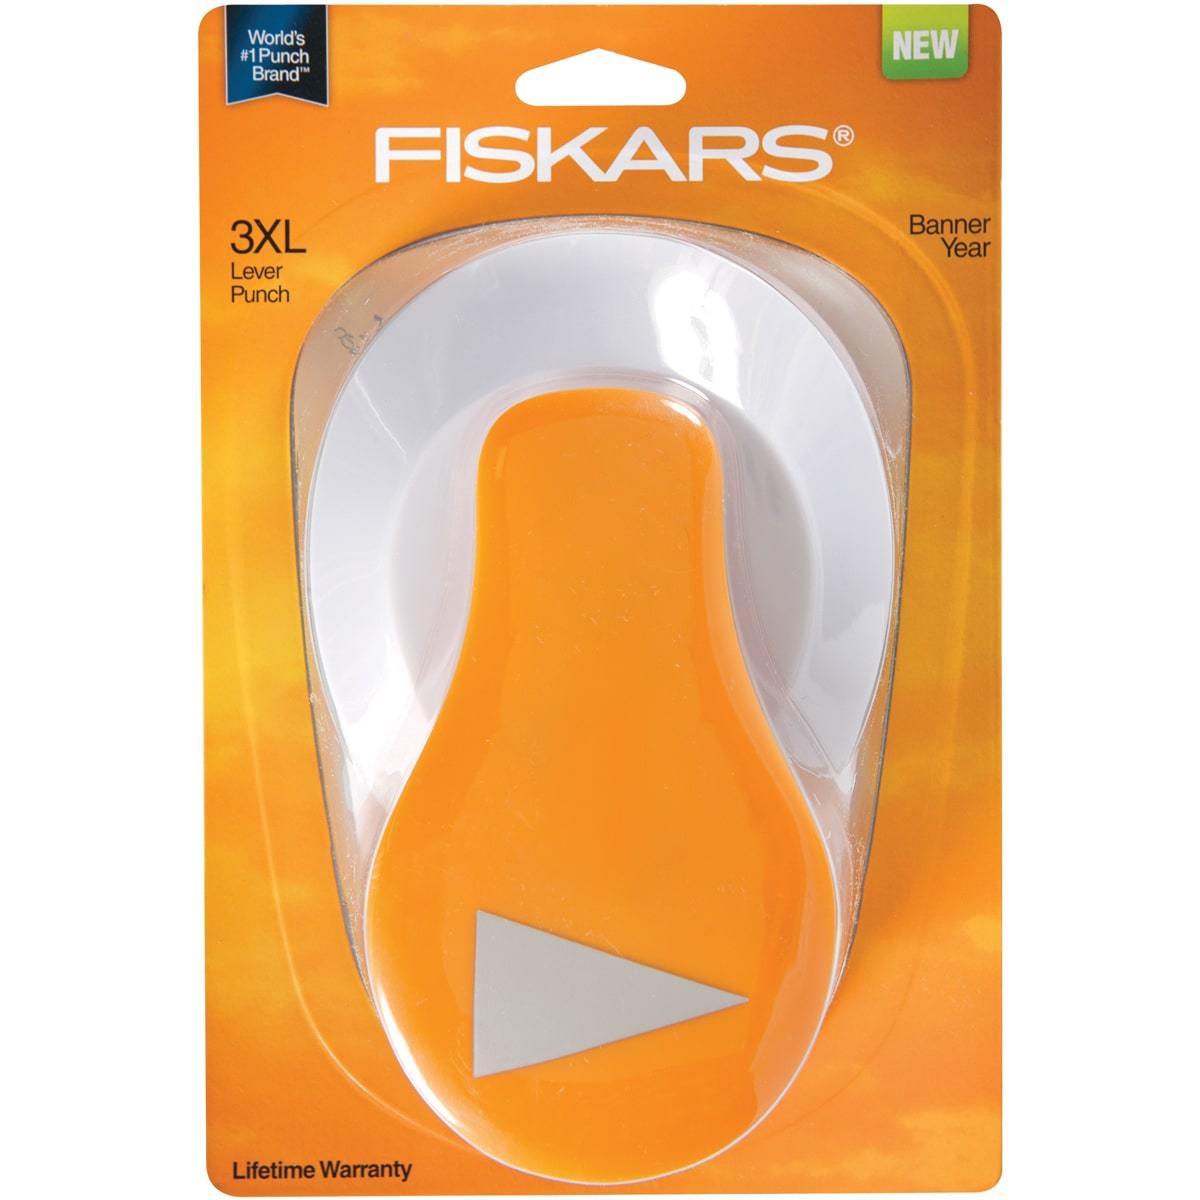 Fiskars 101510-1001 Lever Punch Banner Year 3X-Large